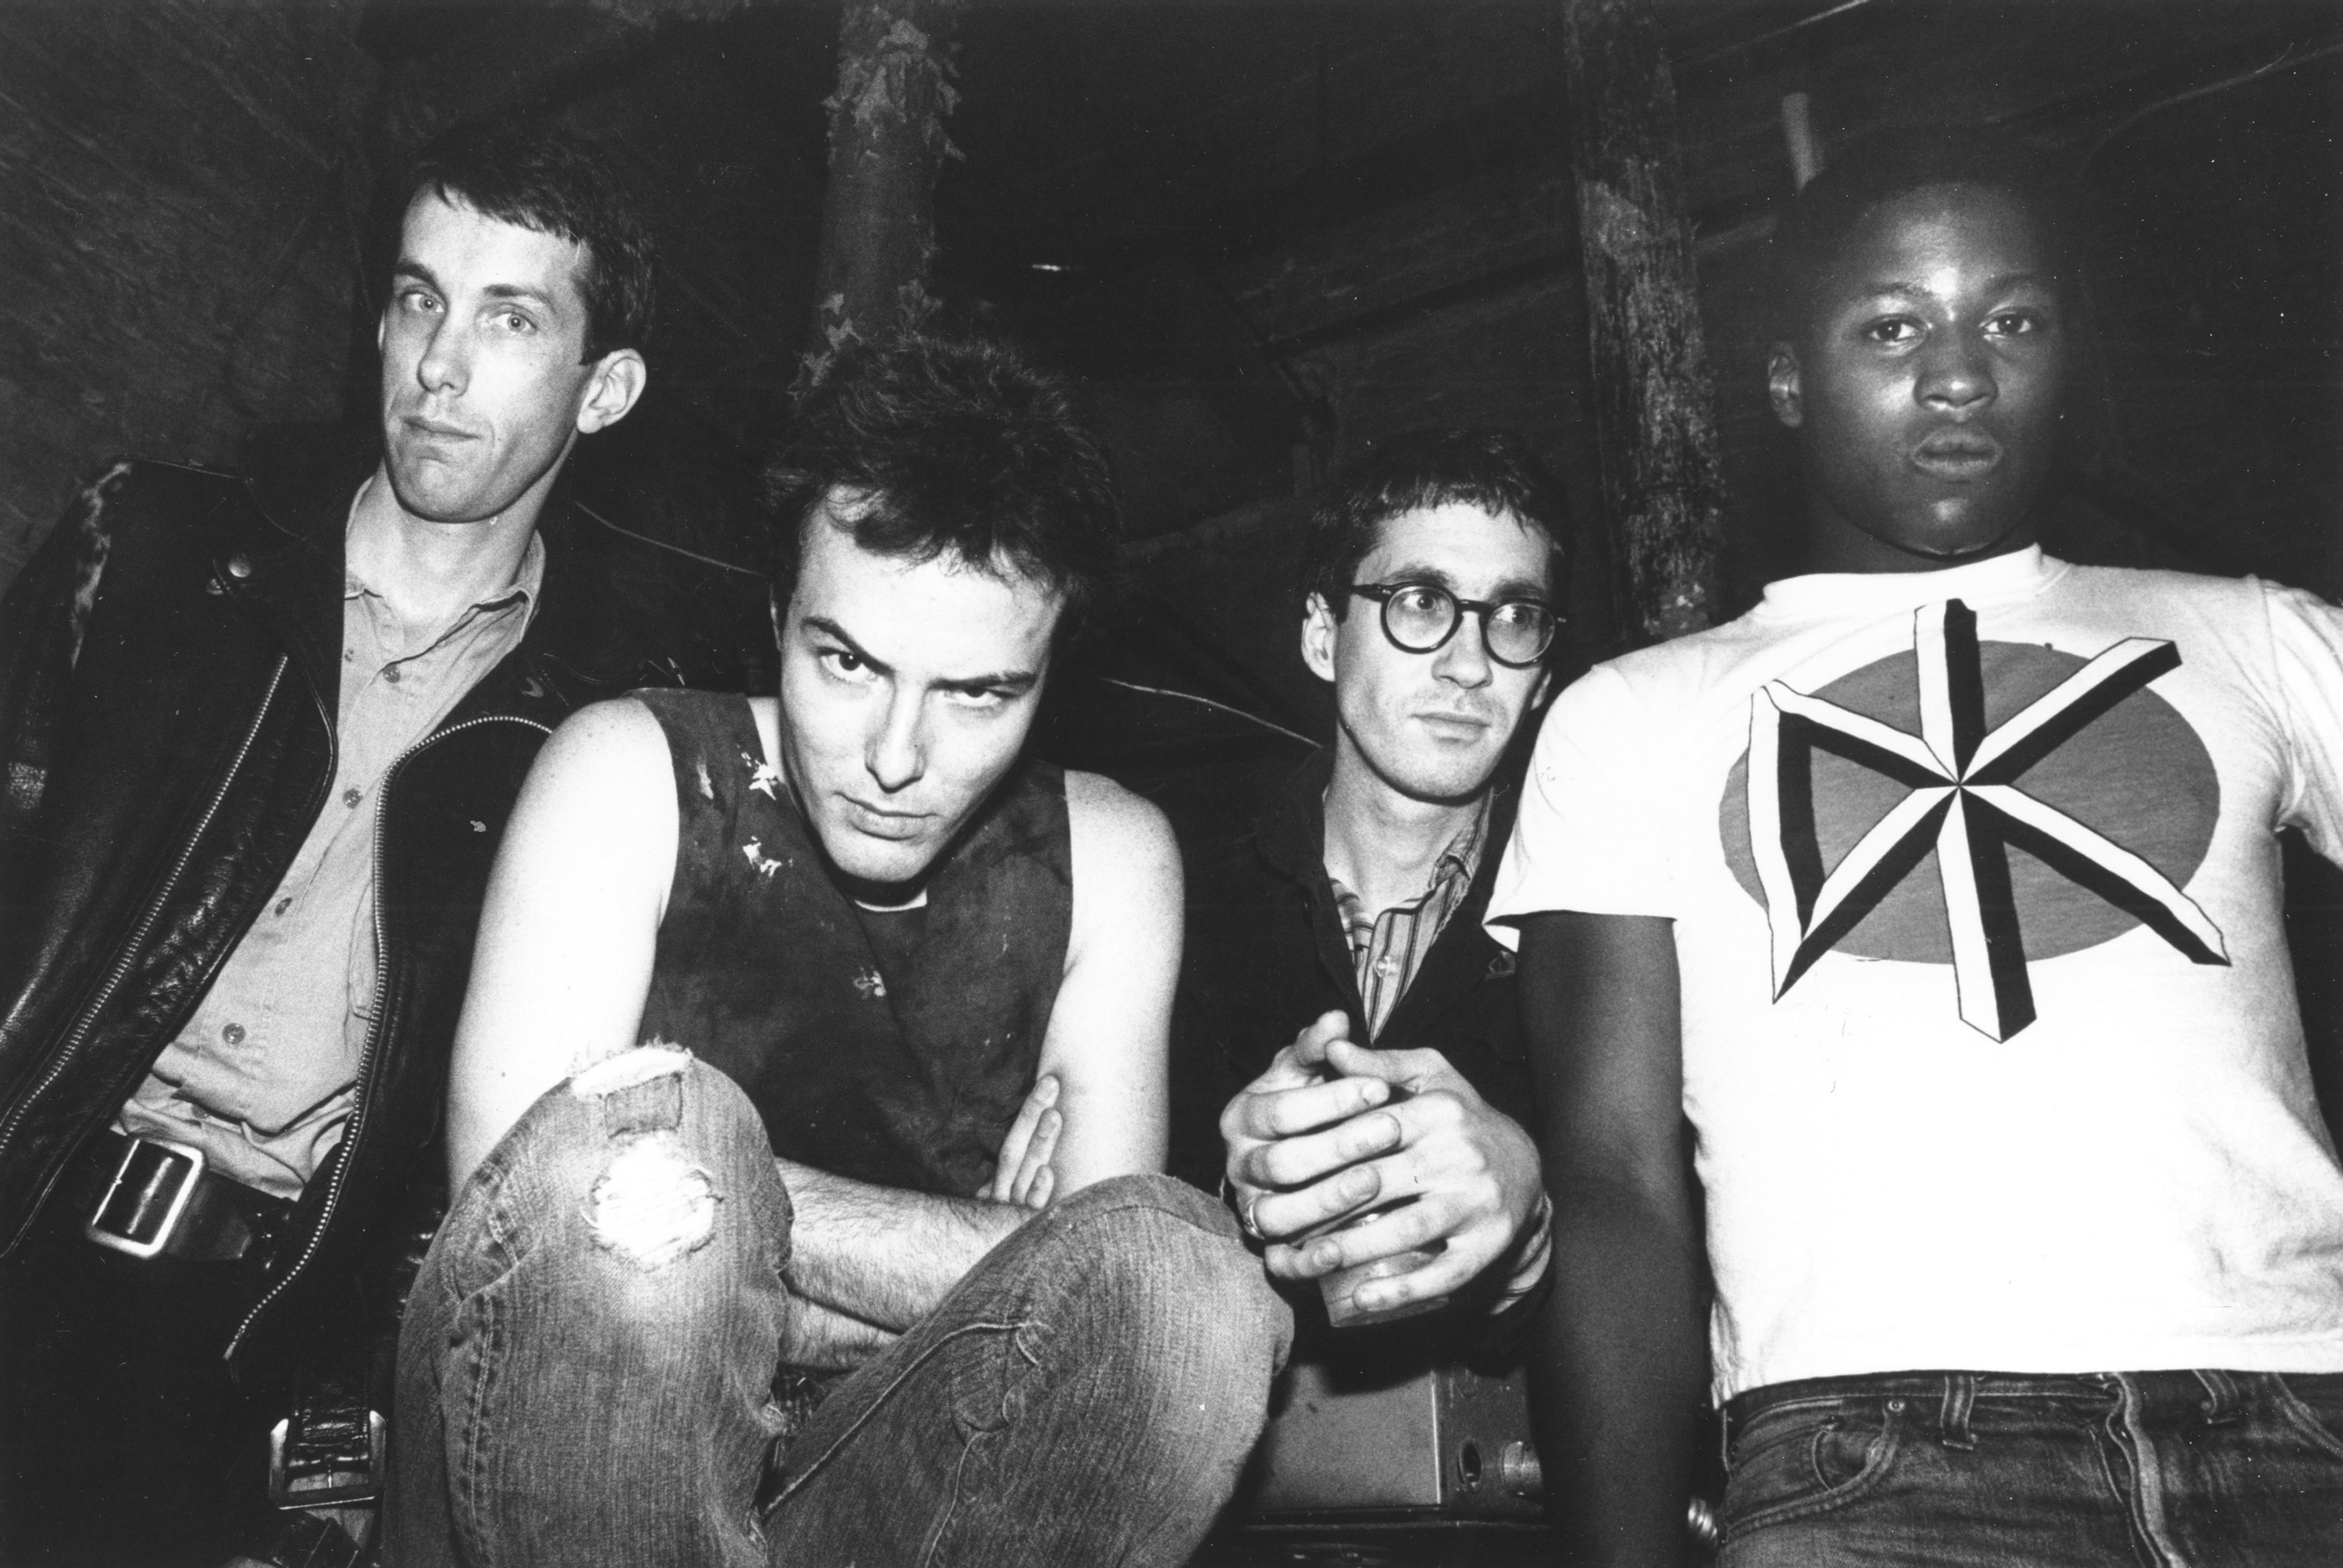 Dead Kennedys: Our 1986 Interview with Jello Biafra